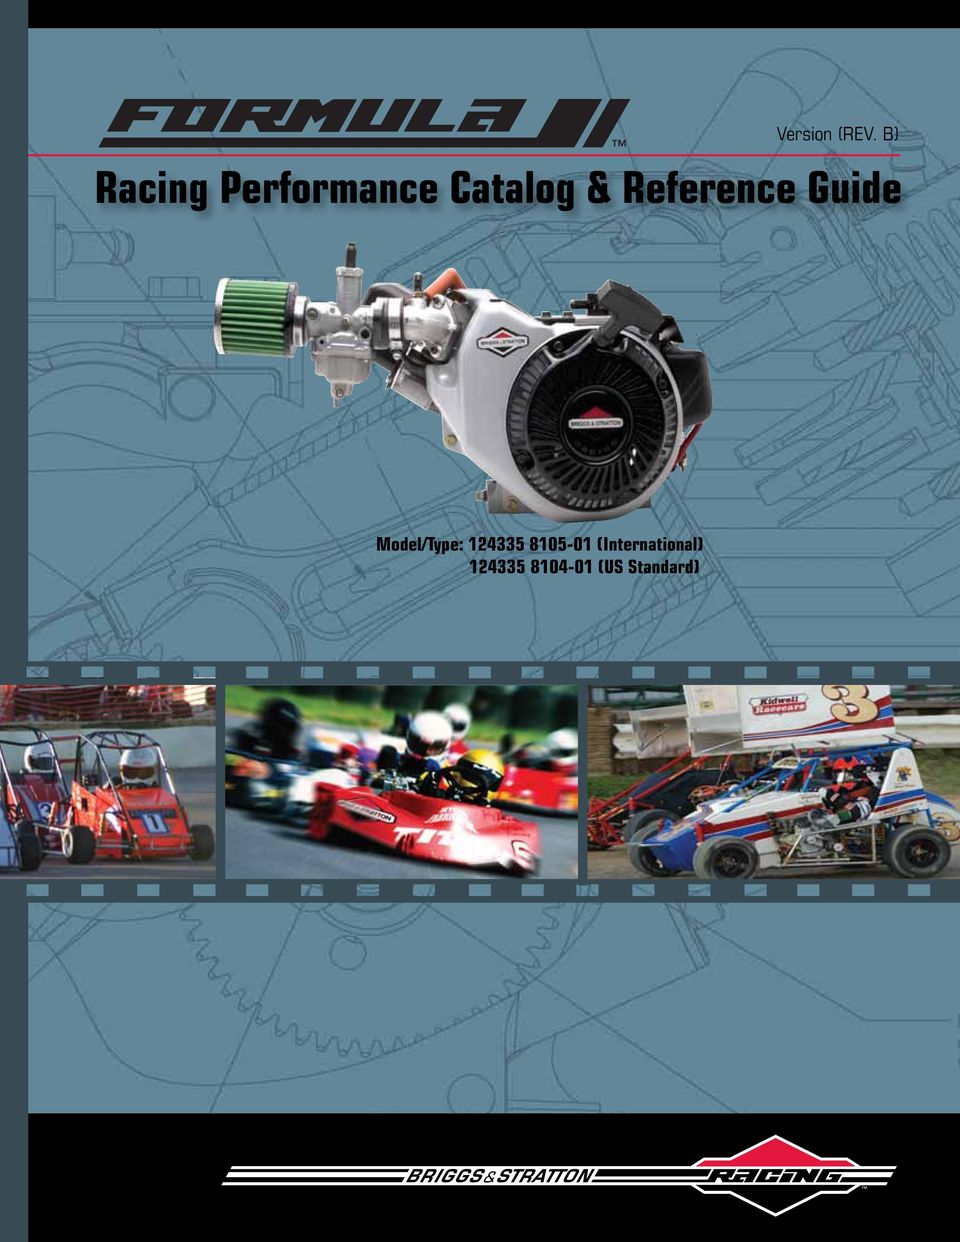 Reference Guide Model/Type: